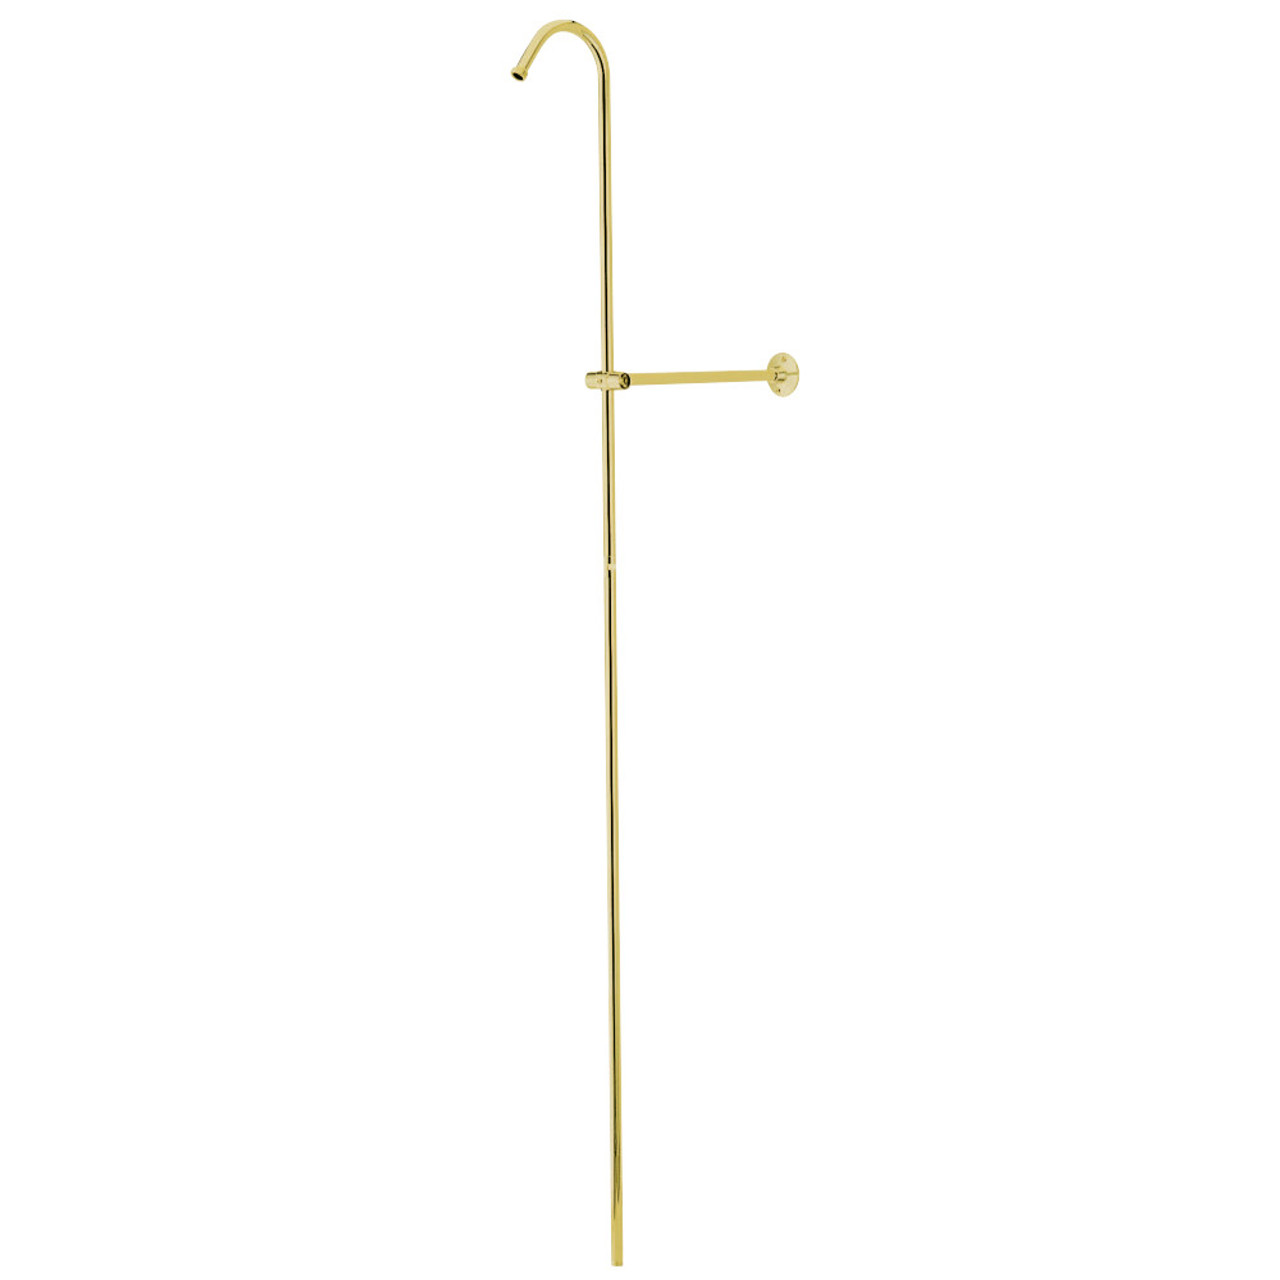 Kingston Brass CCR602 Vintage Shower Riser and Wall Support, Polished Brass